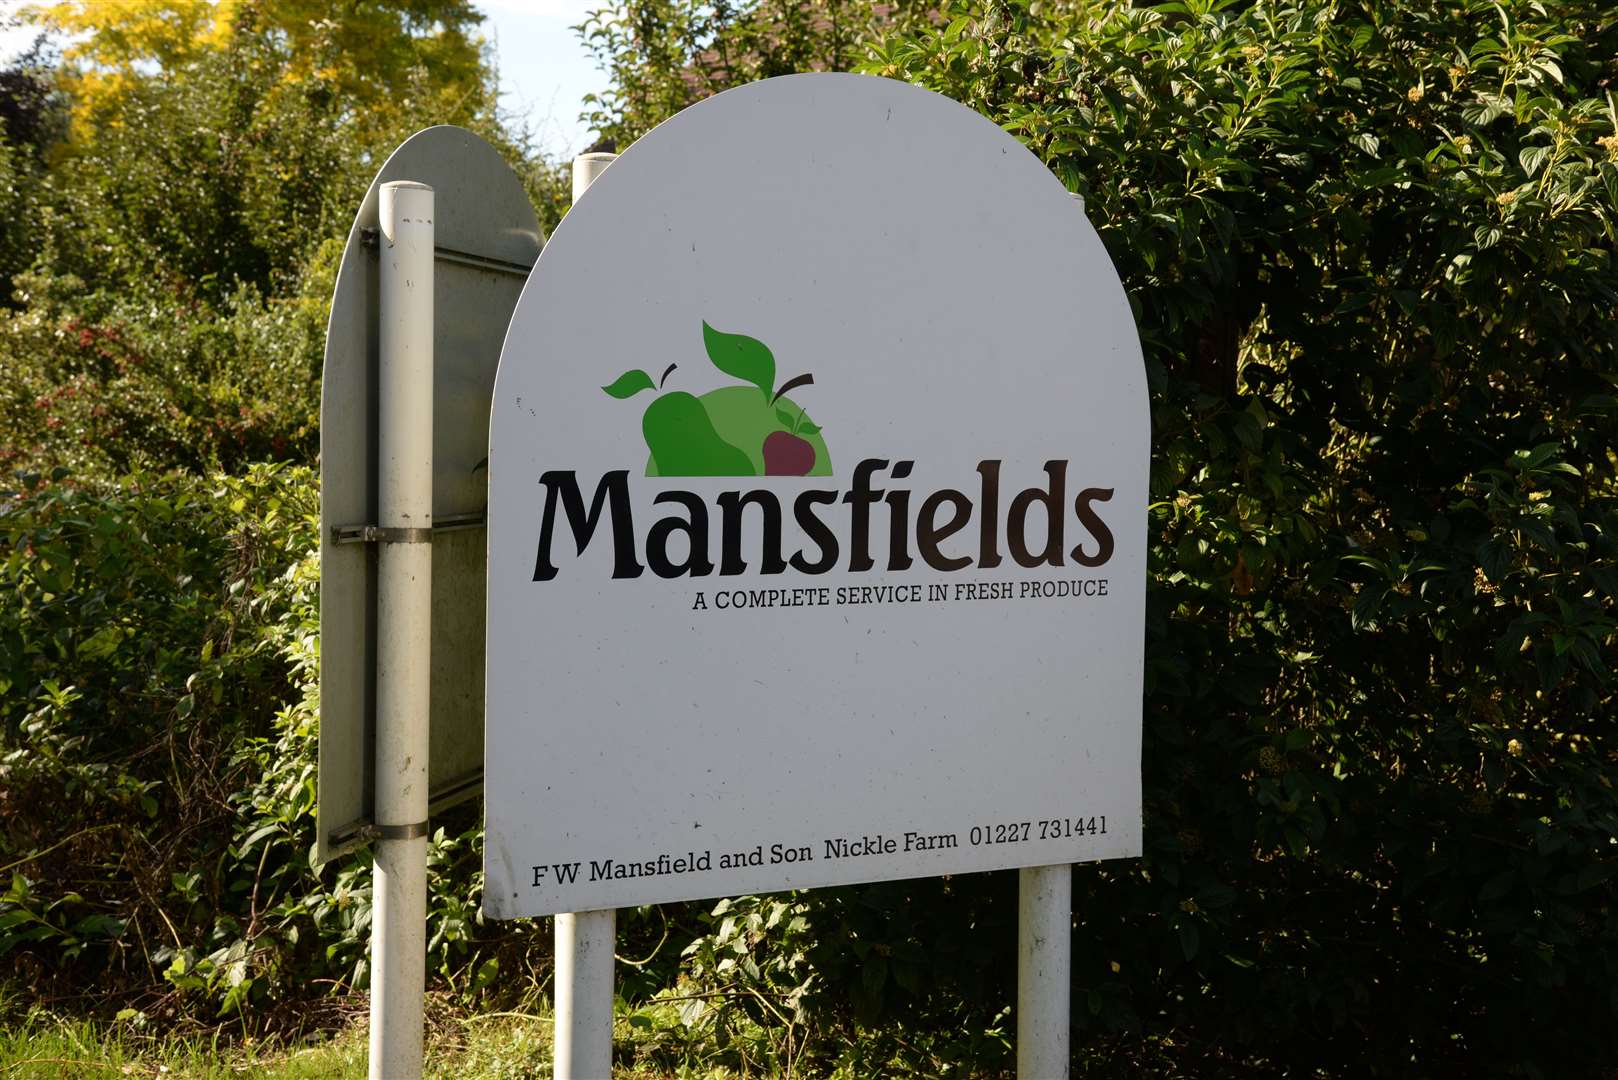 Mansfields is a huge company employing hundreds